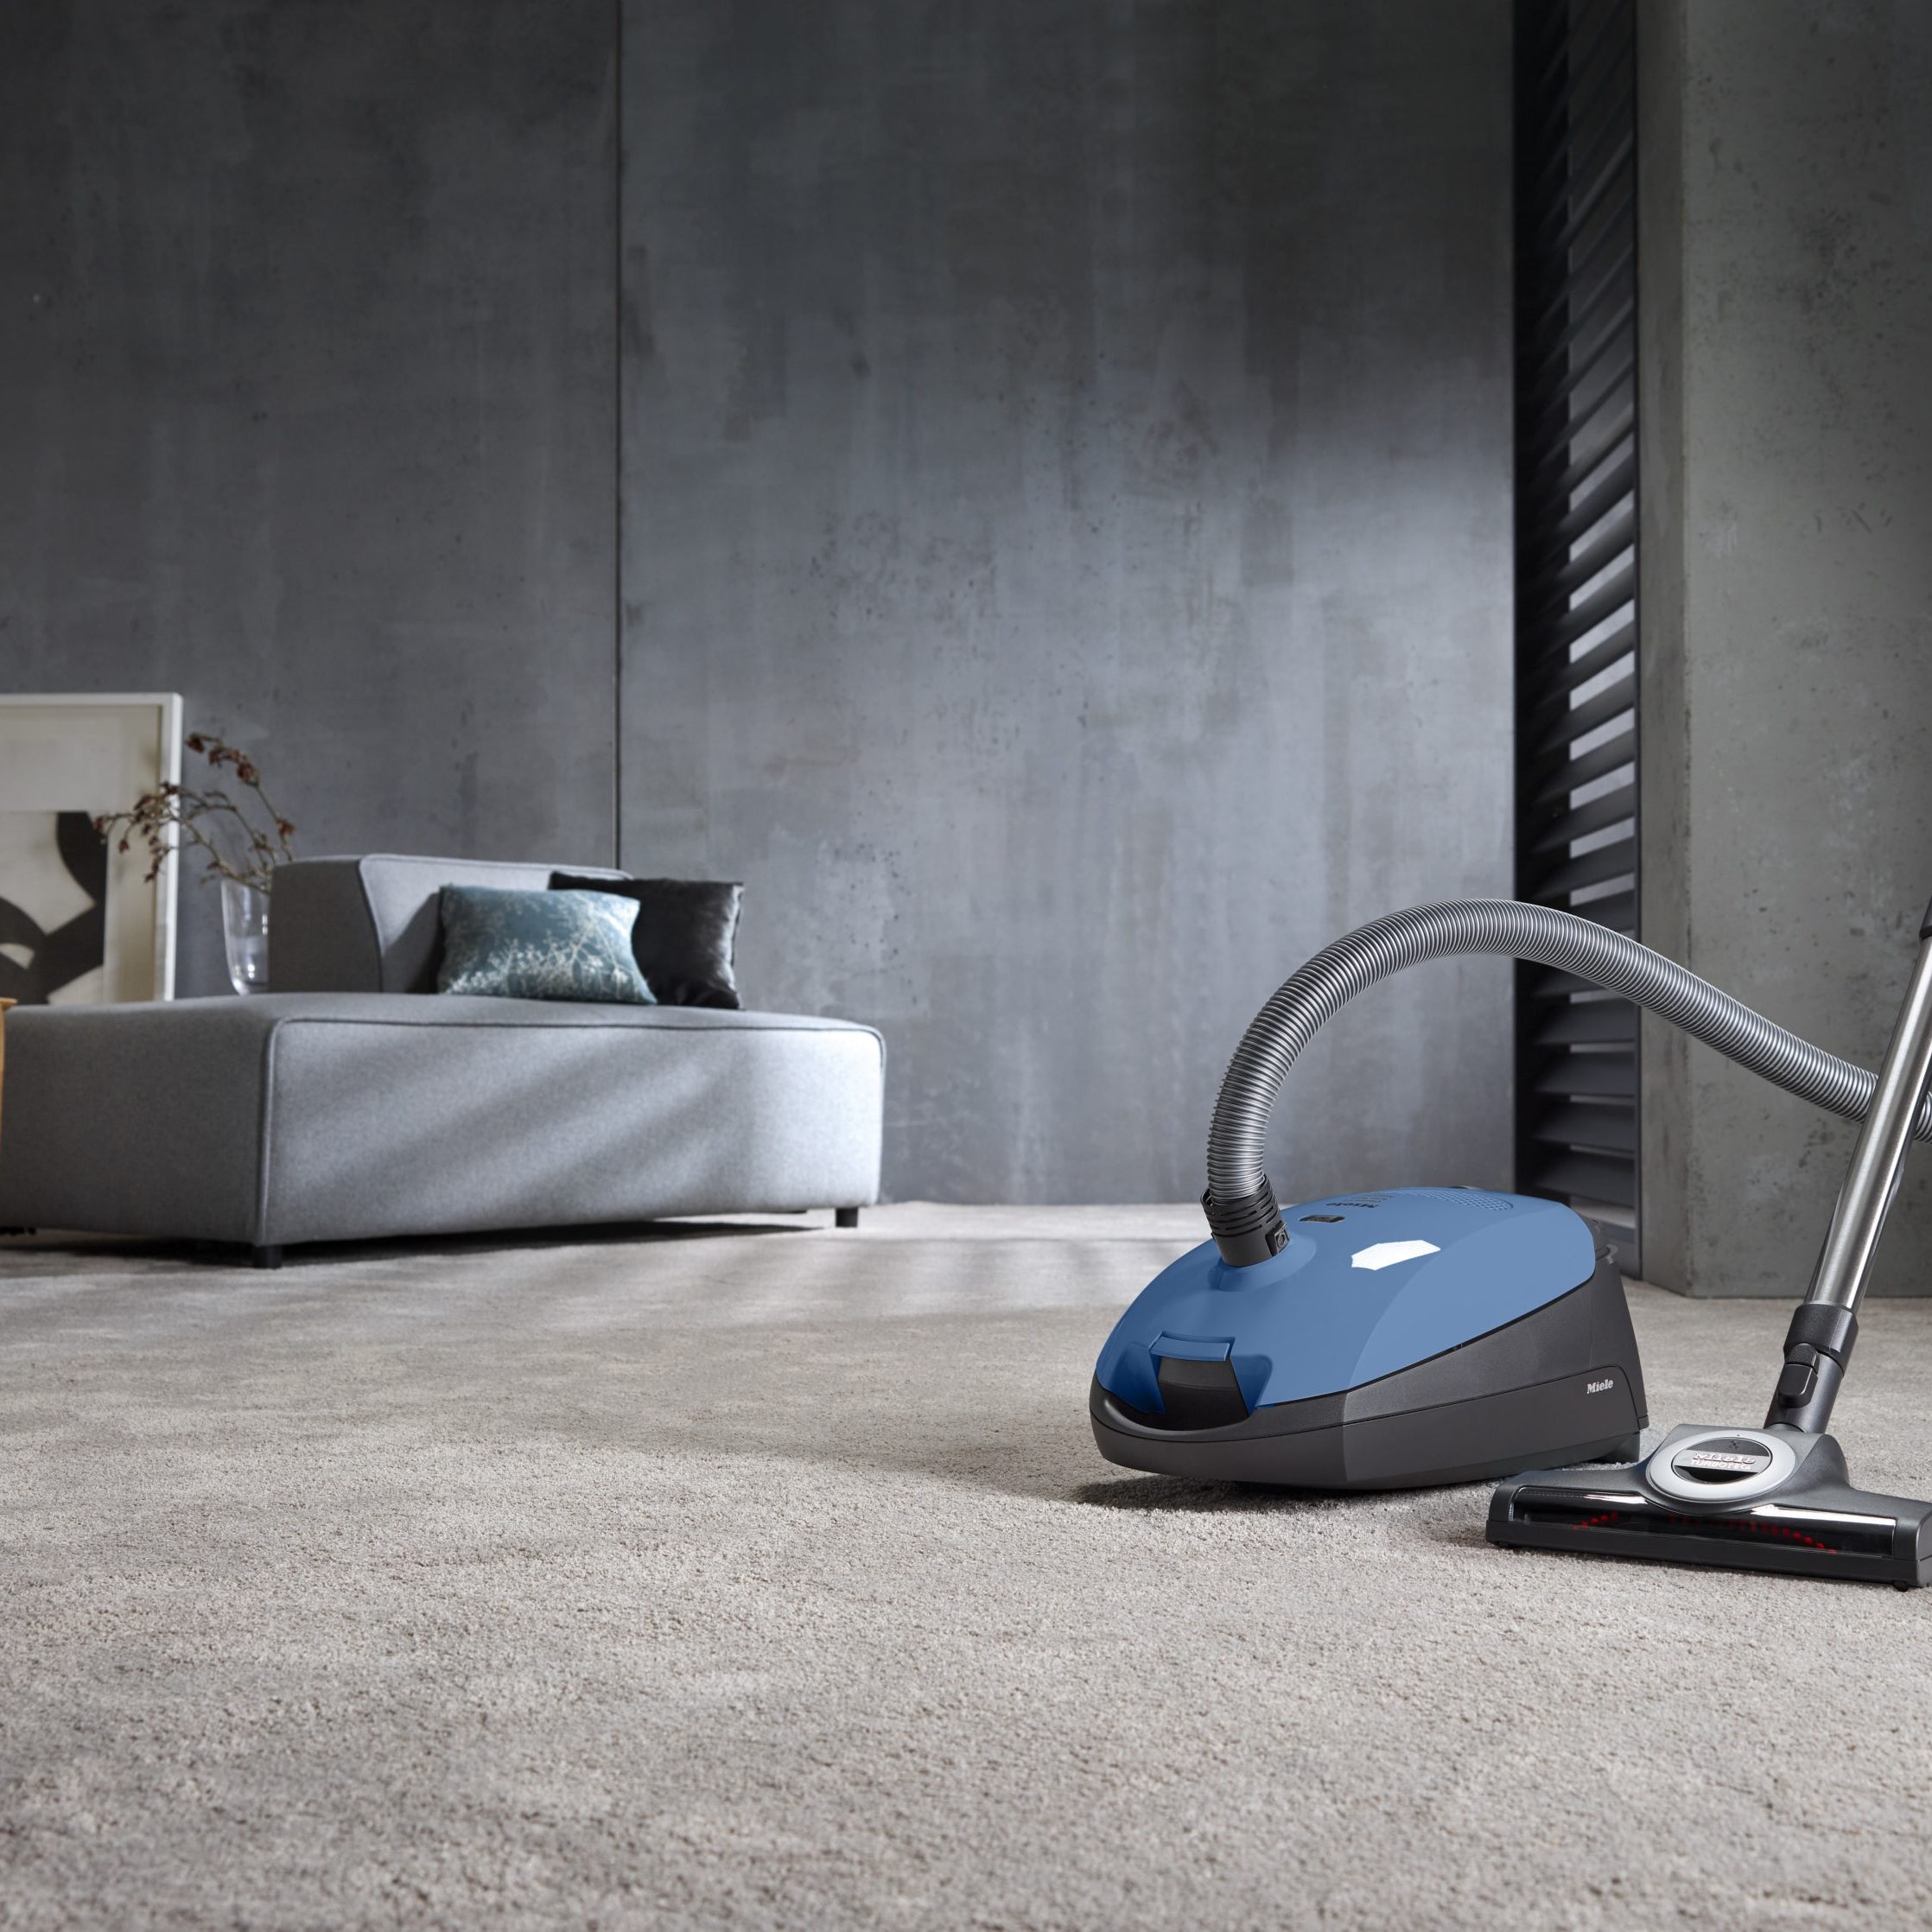 Vacuums for Carpeted Flooring